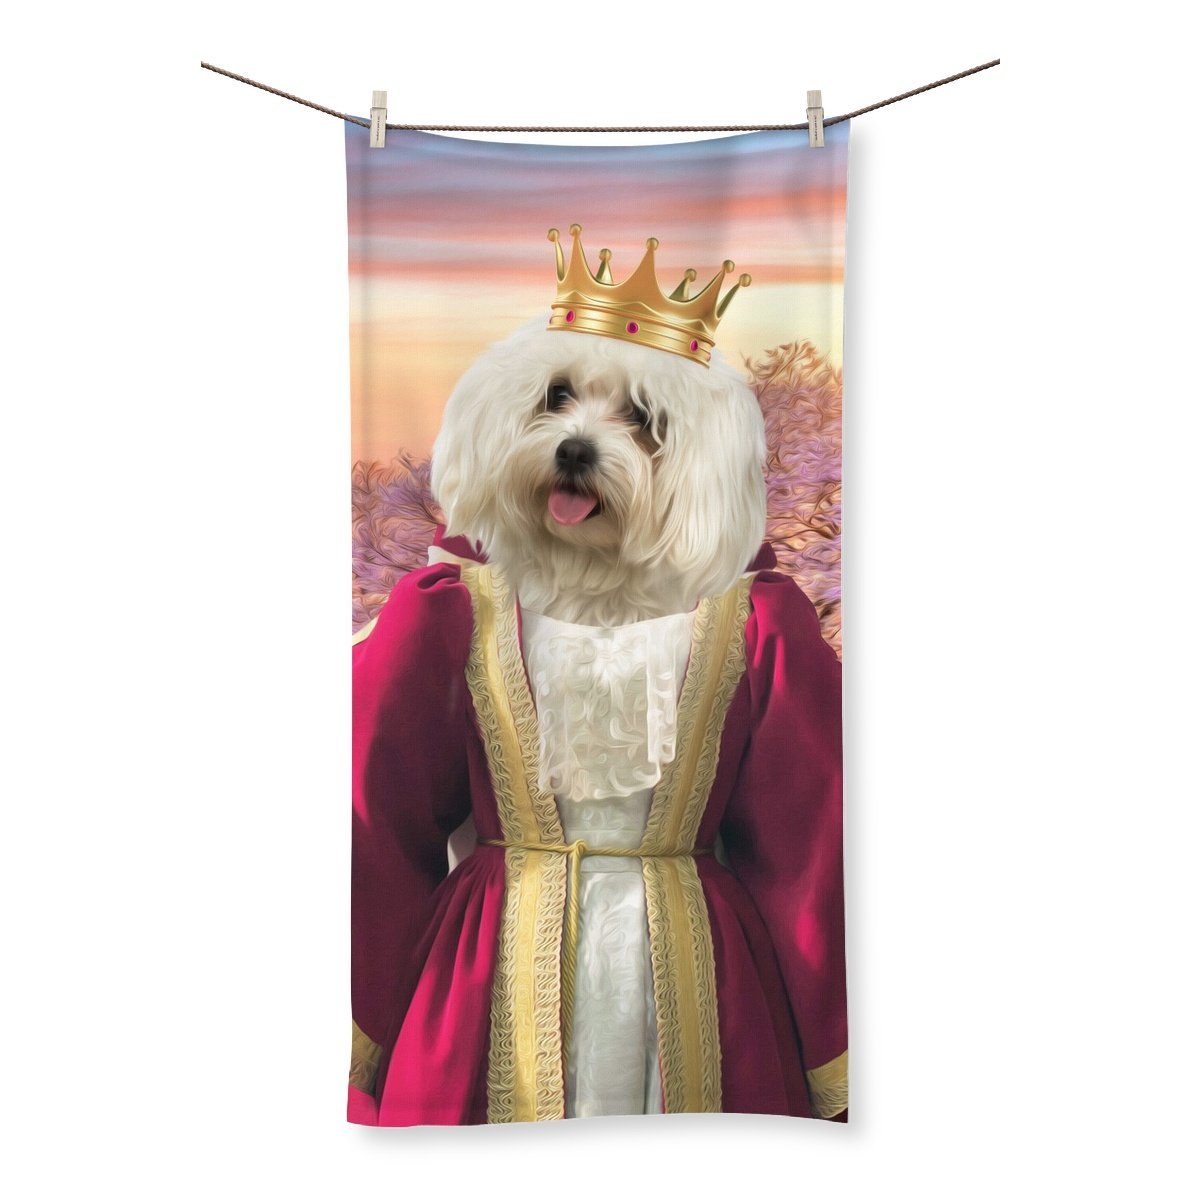 Queen Anne: Custom Pet Towel - Paw & Glory - #pet portraits# - #dog portraits# - #pet portraits uk#Paw & Glory, paw and glory, pictures for pets, custom pet paintings, dog portrait painting, funny dog paintings, dog portrait painting, the general portrait, pet portraits,pet portraits Towel